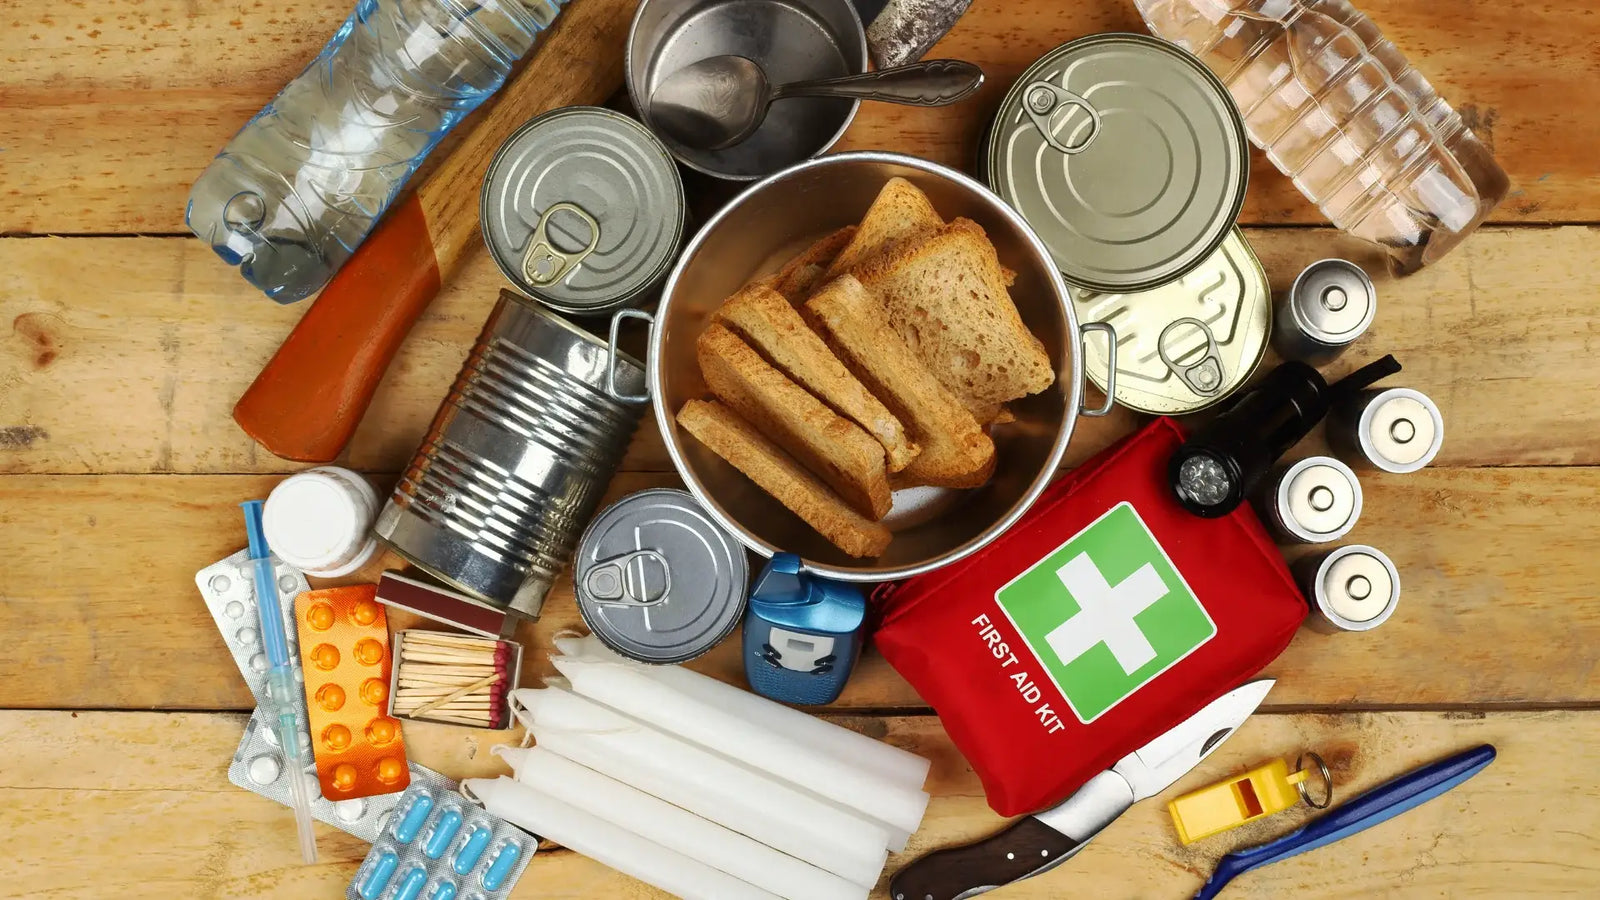 Useful Products Every Meal Prepper Needs